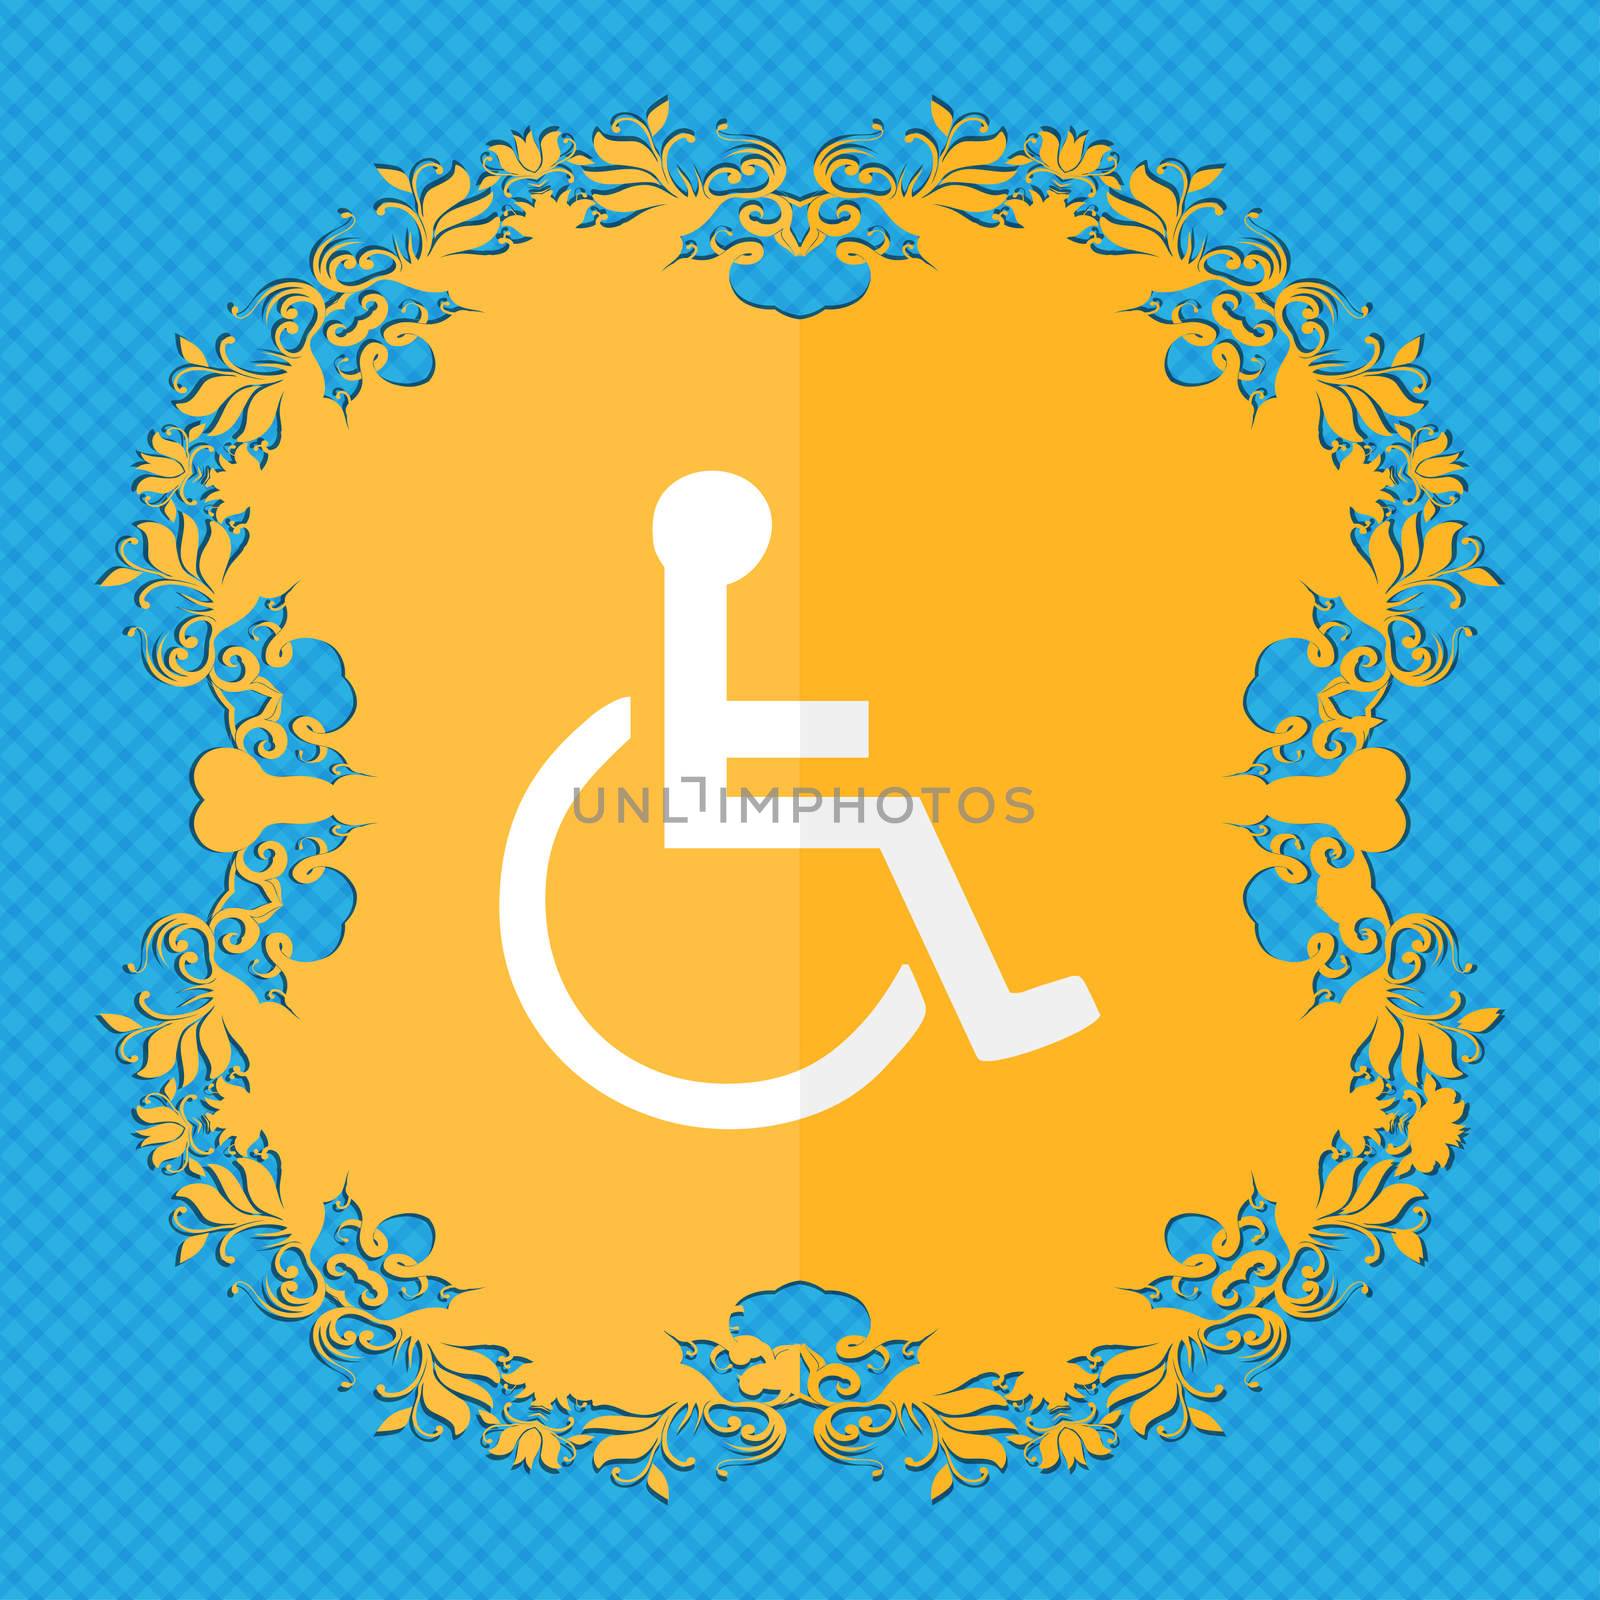 disabled. Floral flat design on a blue abstract background with place for your text.  by serhii_lohvyniuk